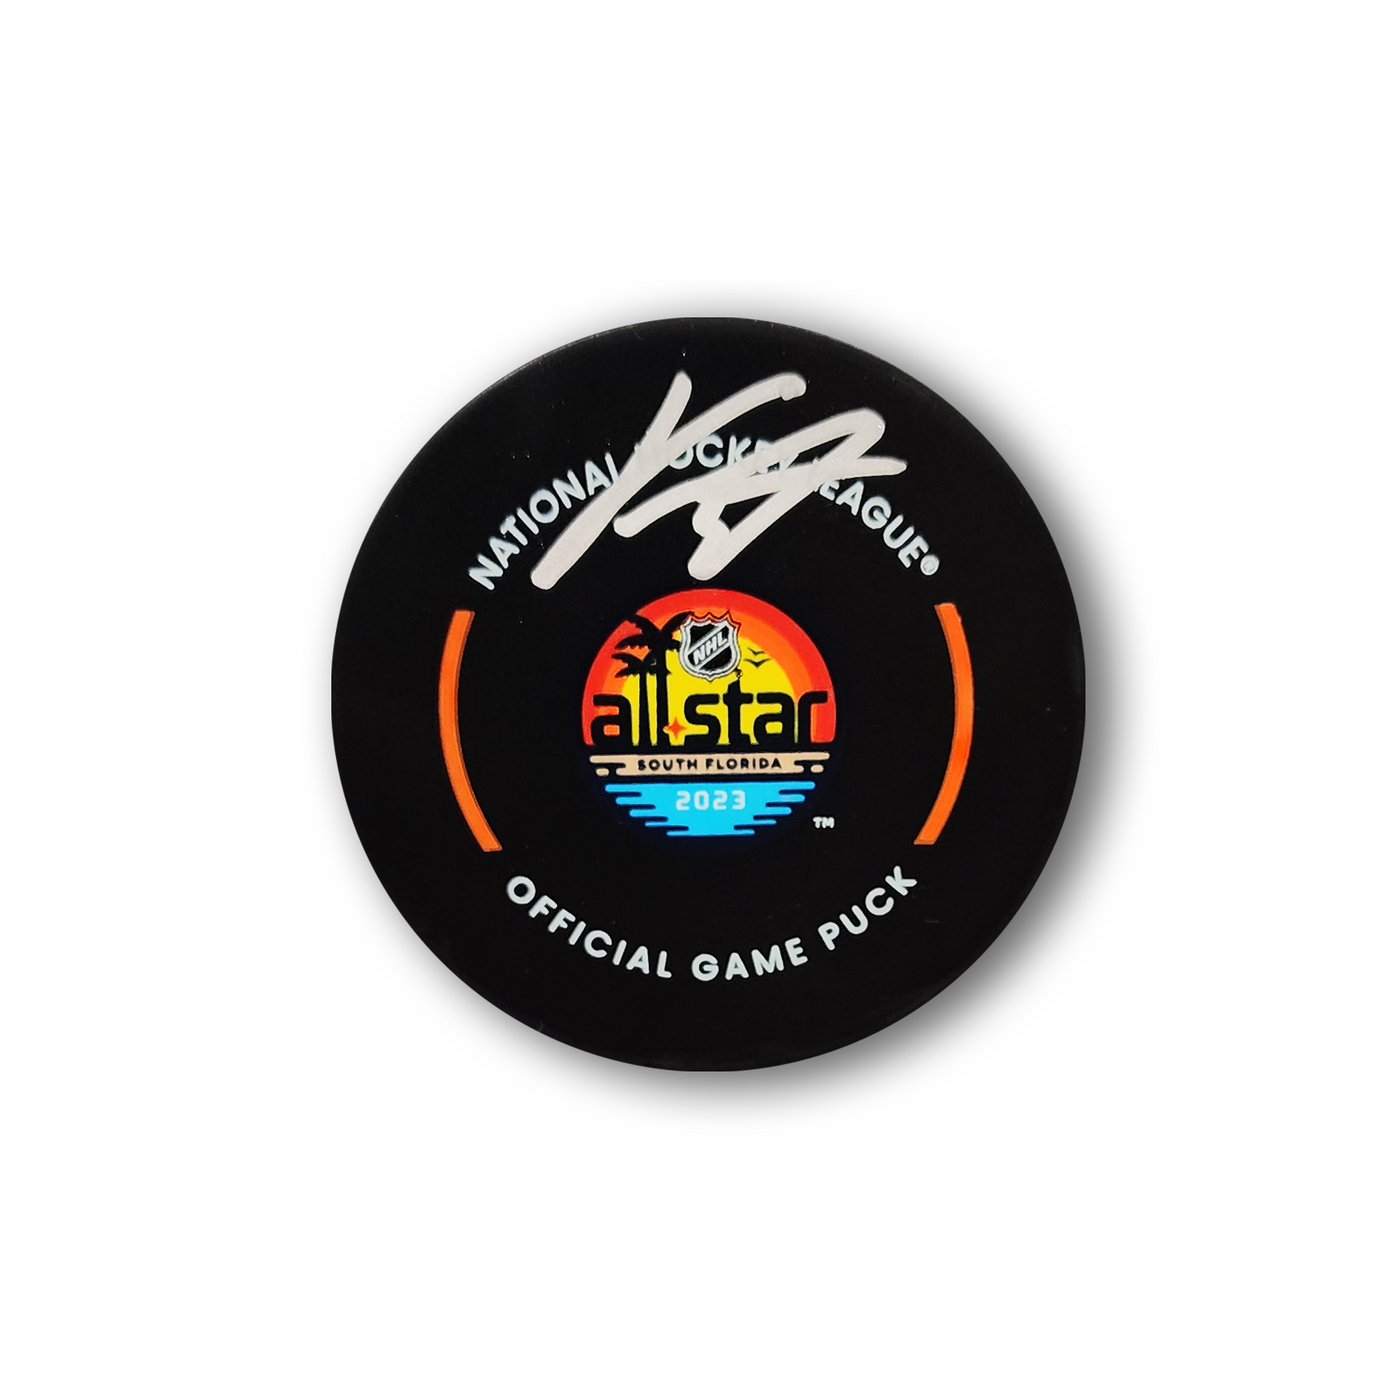 Kirill Kaprizov 2023 NHL All Star Western Conference Autographed Official Hockey Puck